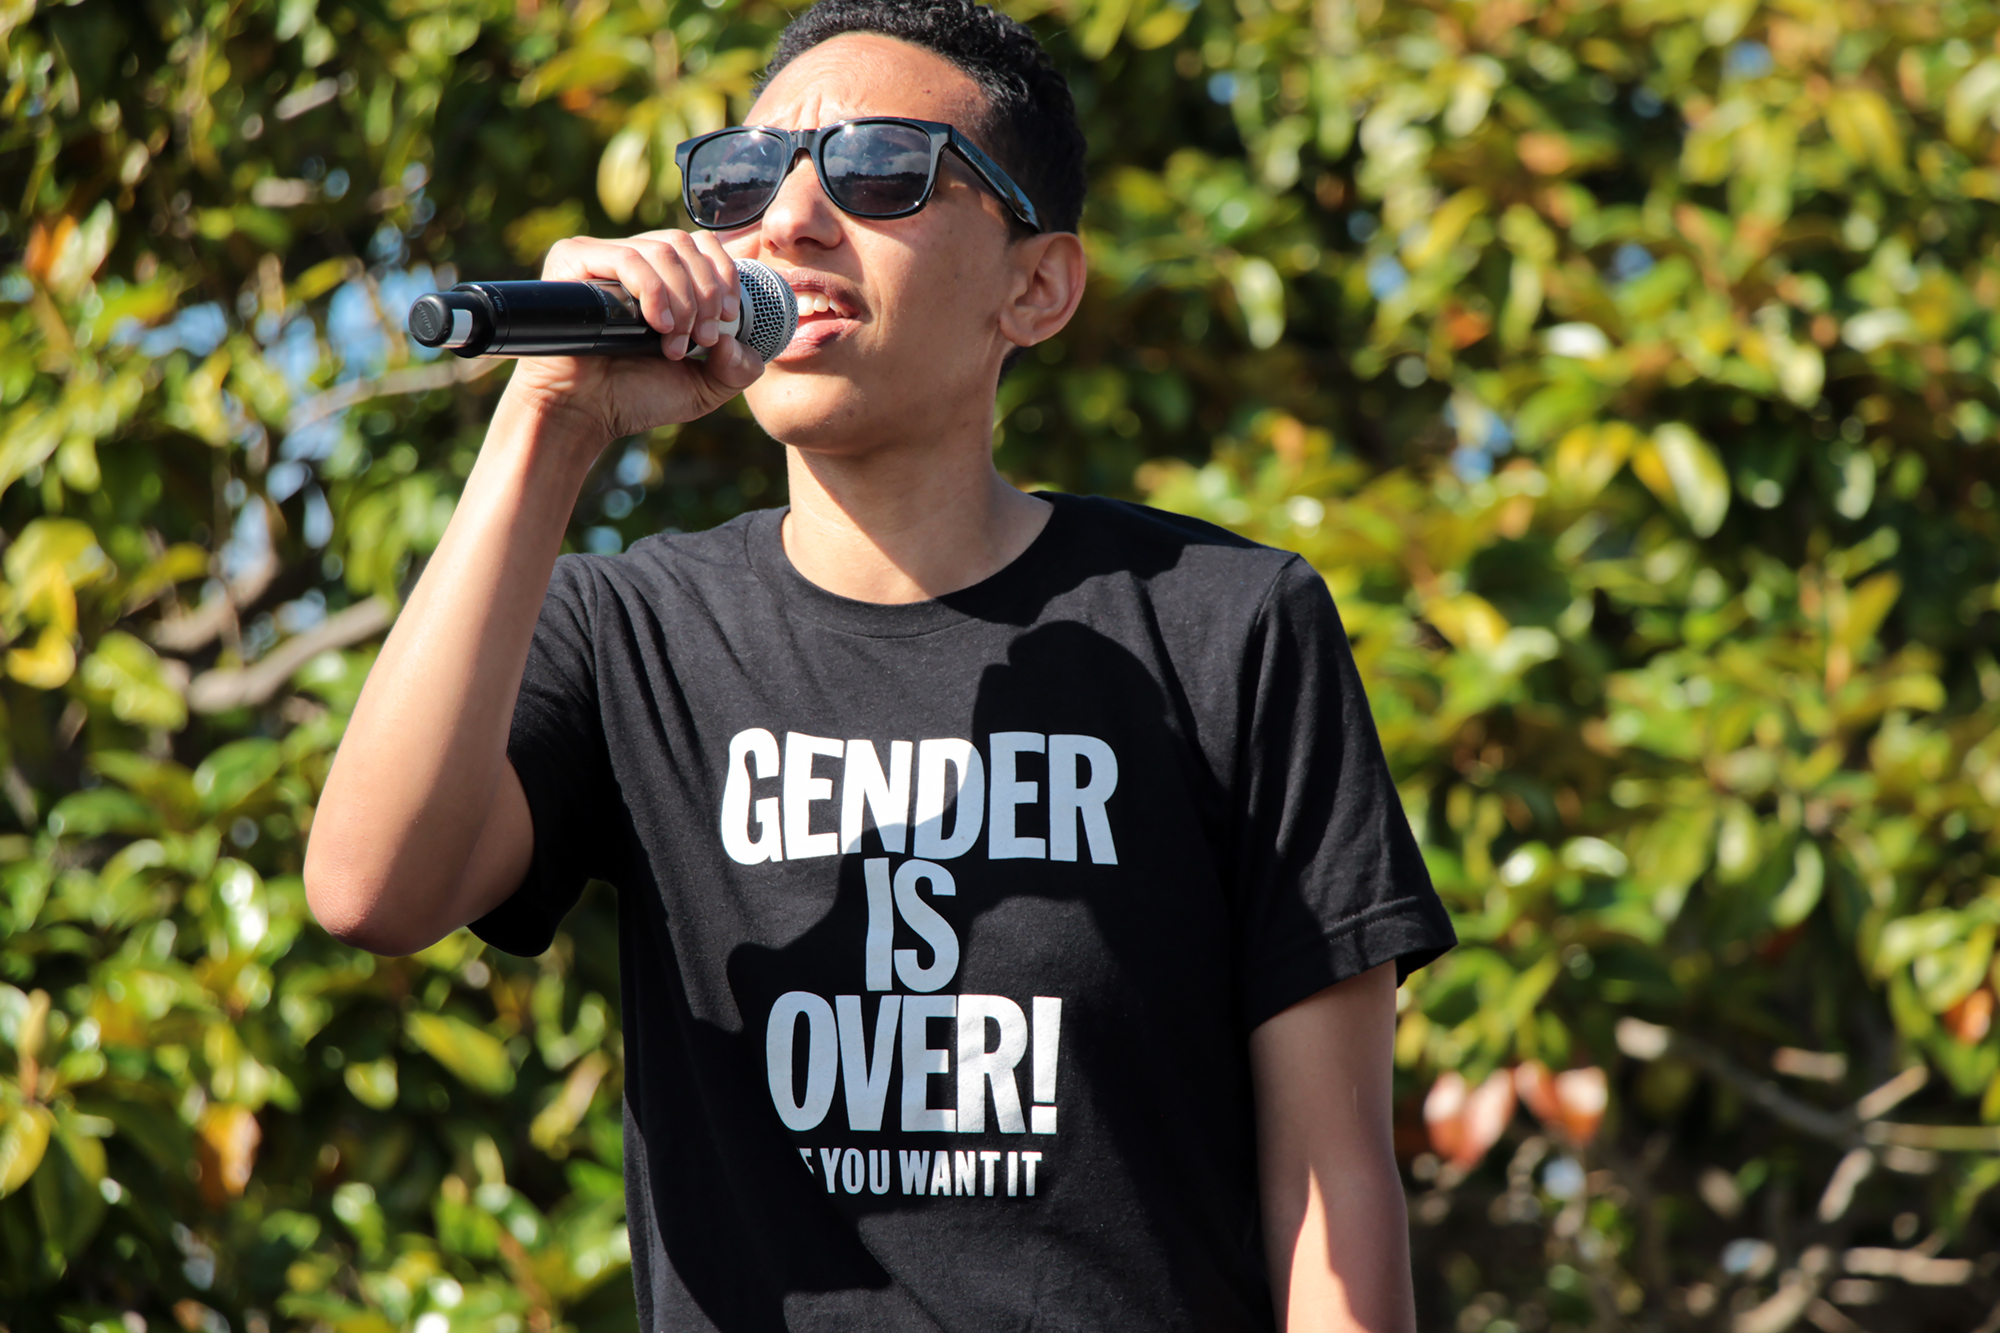 Trans March SF 2017 - Gender is Over!